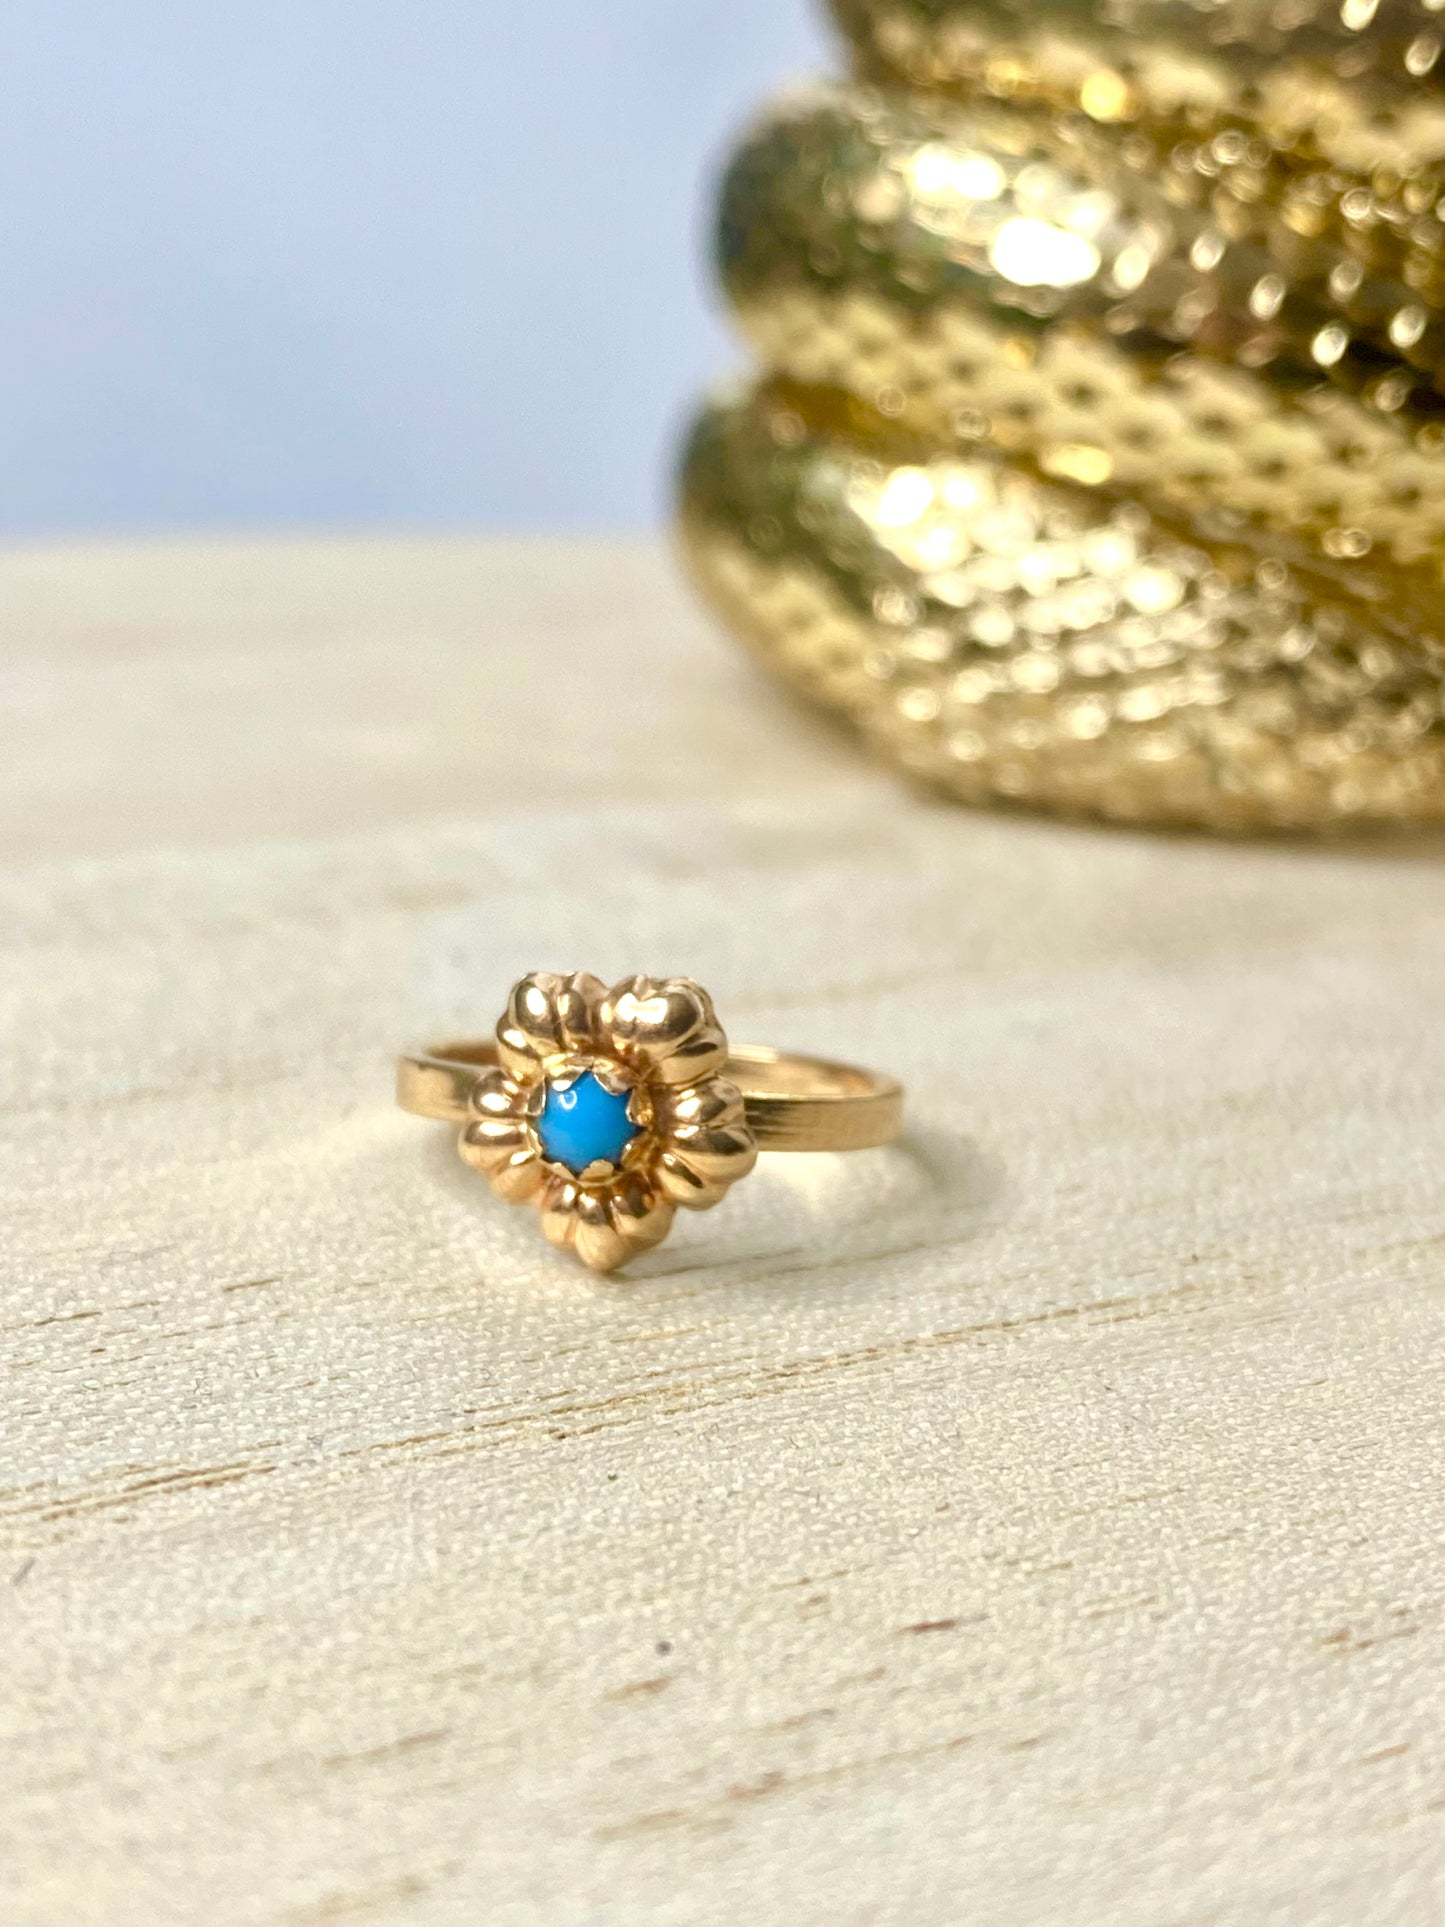 VINTAGE 18K Yellow Gold Ring Micro Turquoise Stone Ring Size 3 US (baby/child)